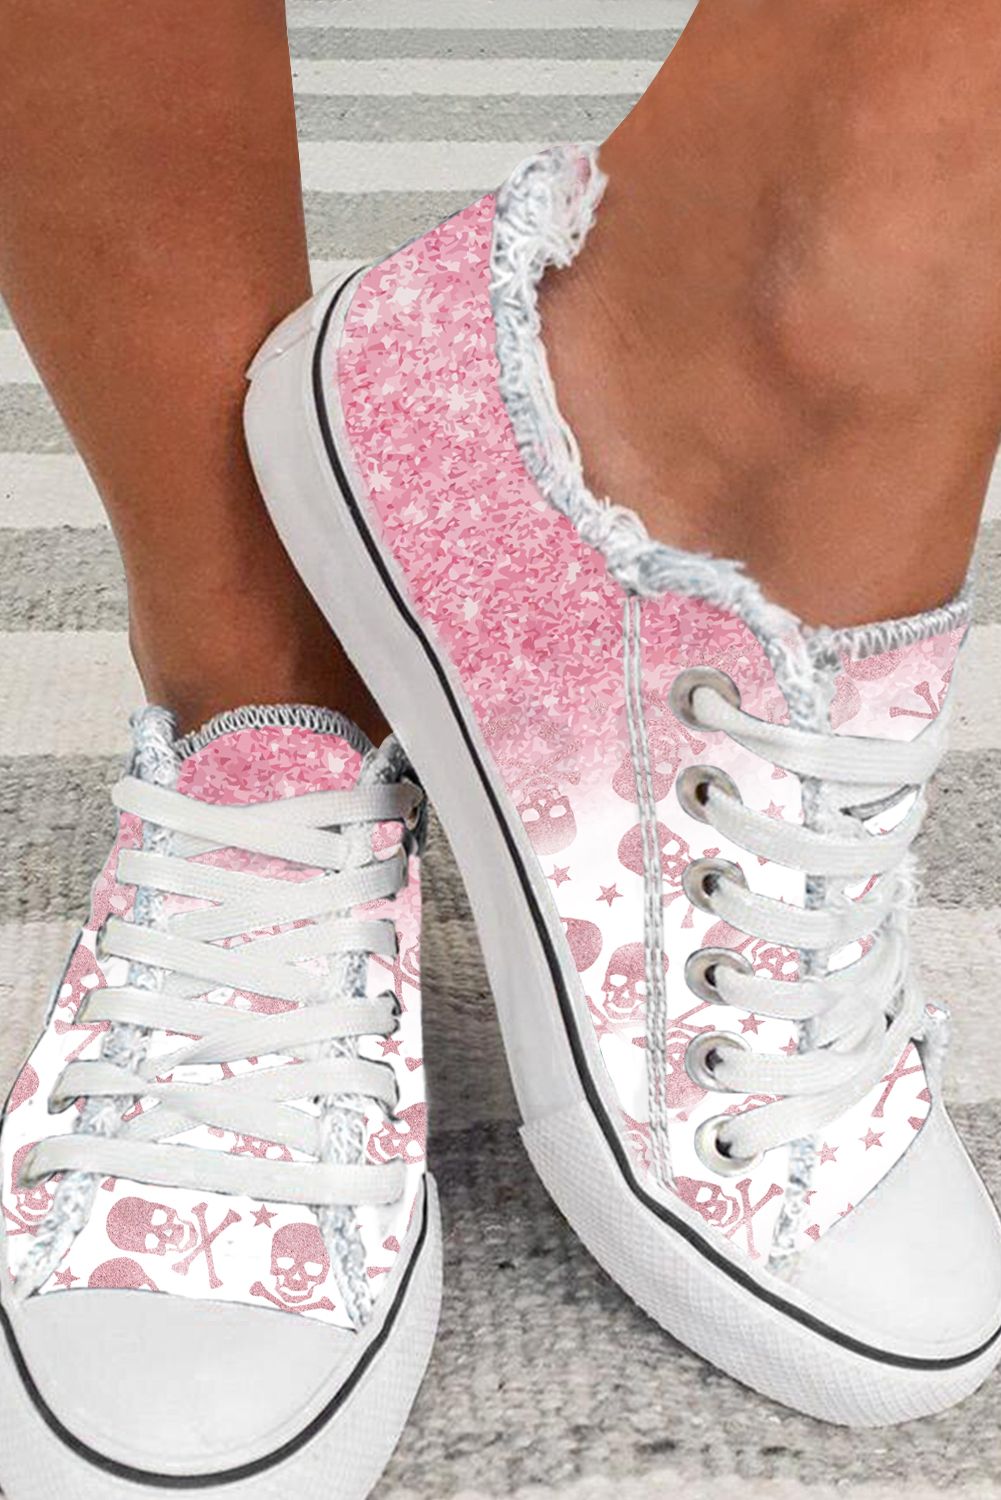 Pink Glitter Skull Canvas Shoes $ 29.99 - Evaless